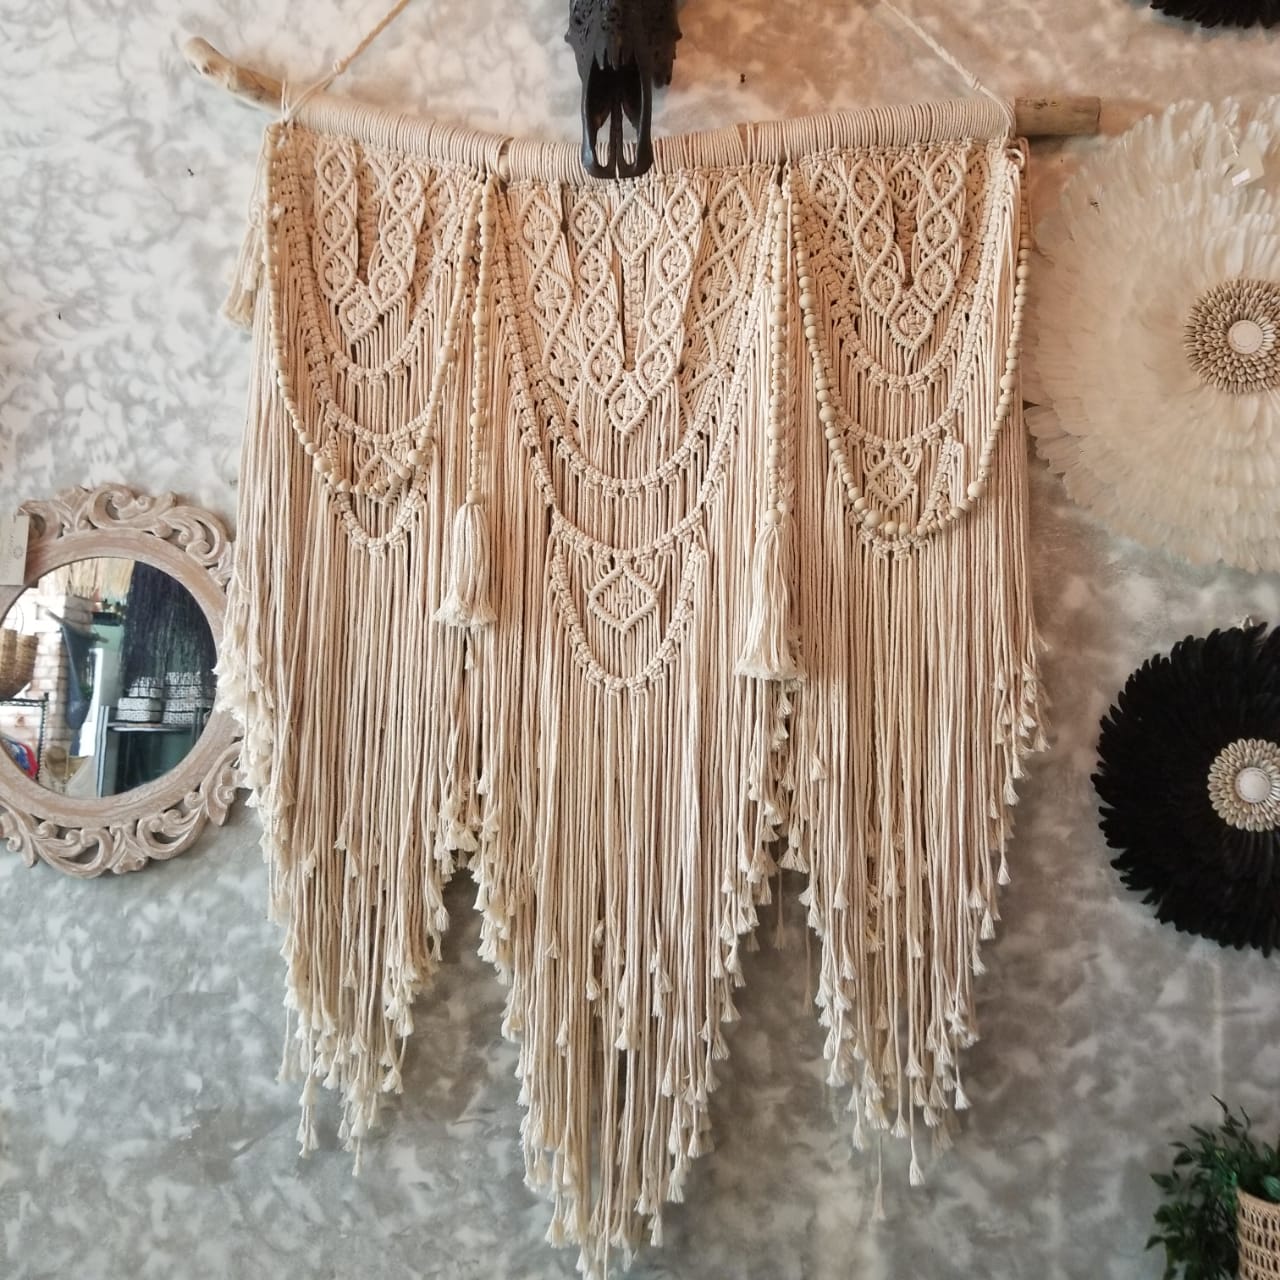 Cream Macrame Wall Hanging with Beads on Branch